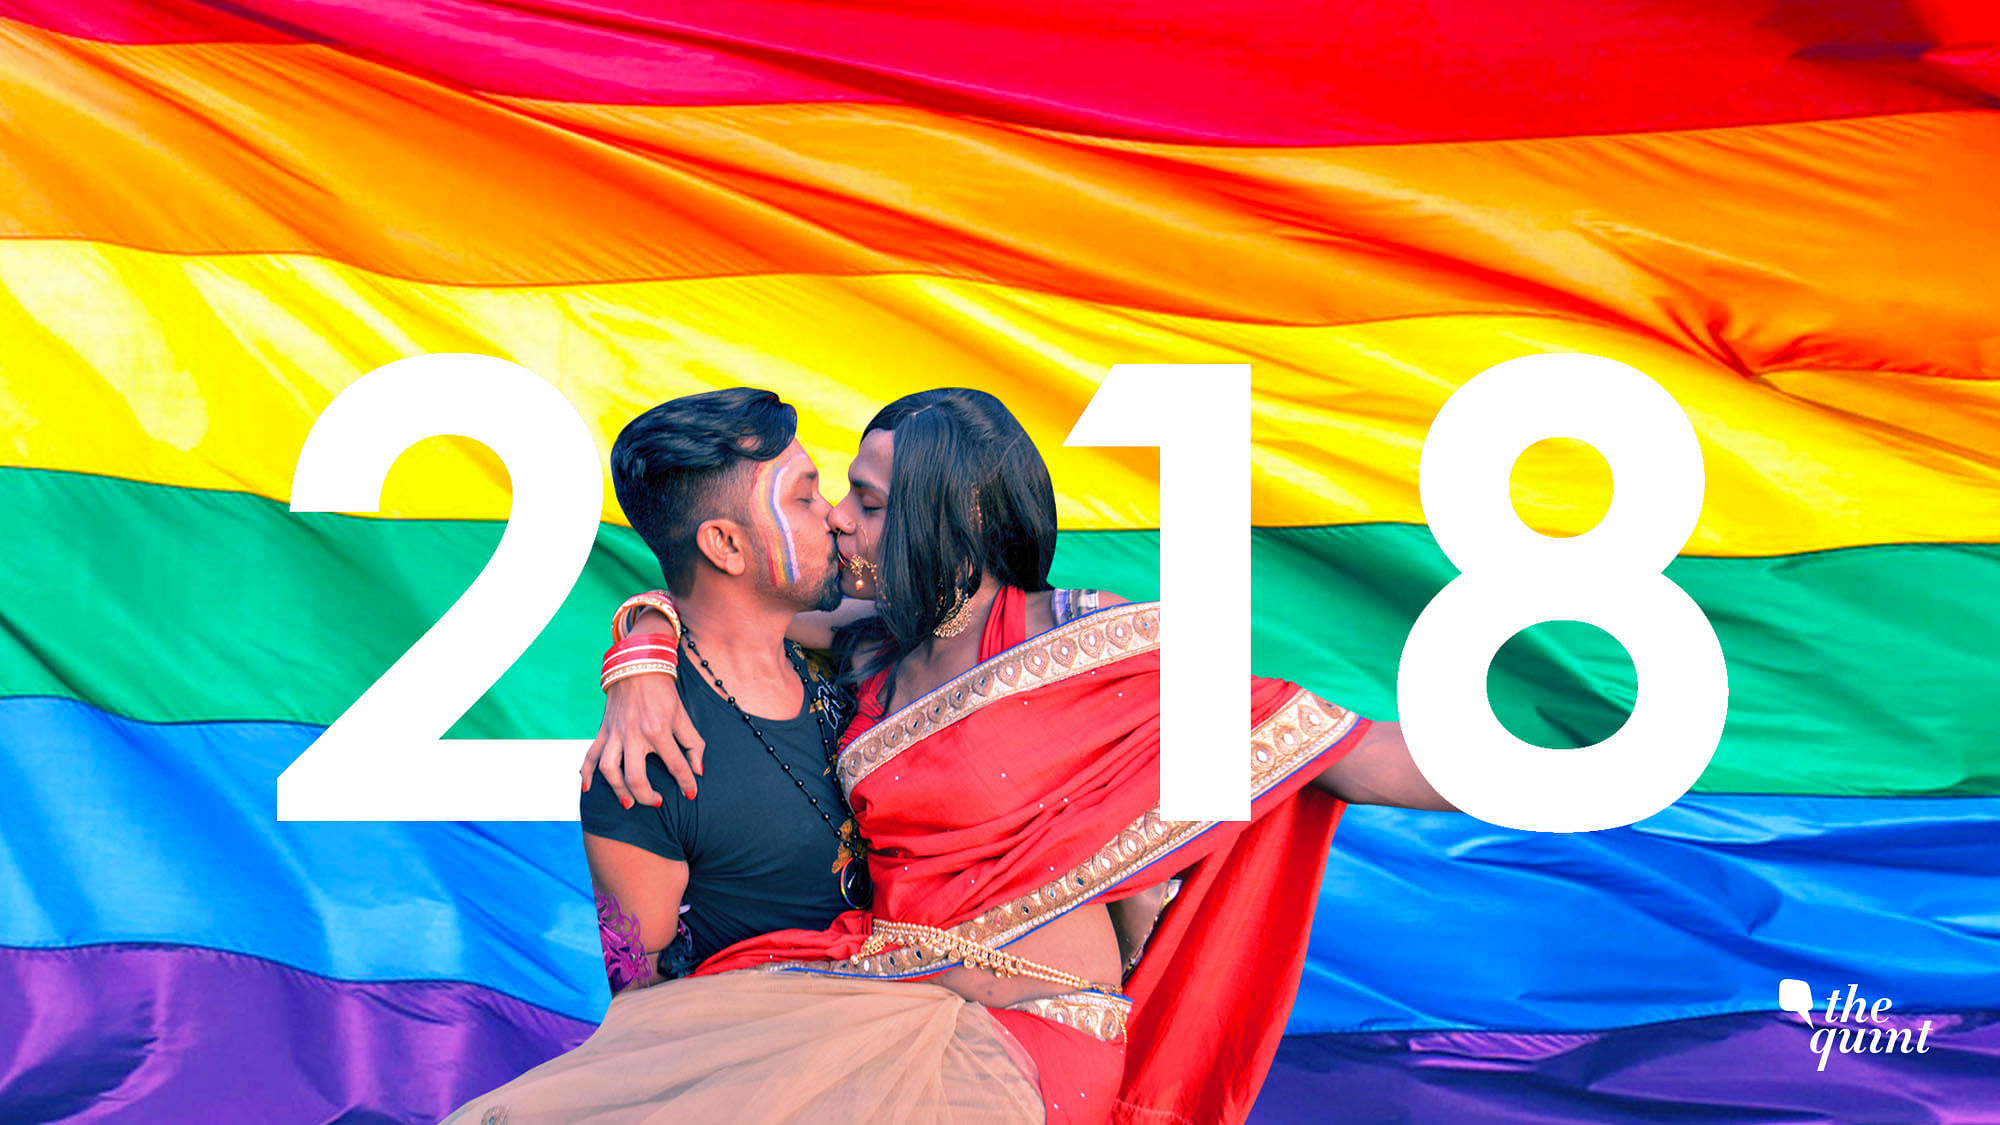 Here’s a look at the year 2018 in the lives of members of the Indian LGBTQ+ community.